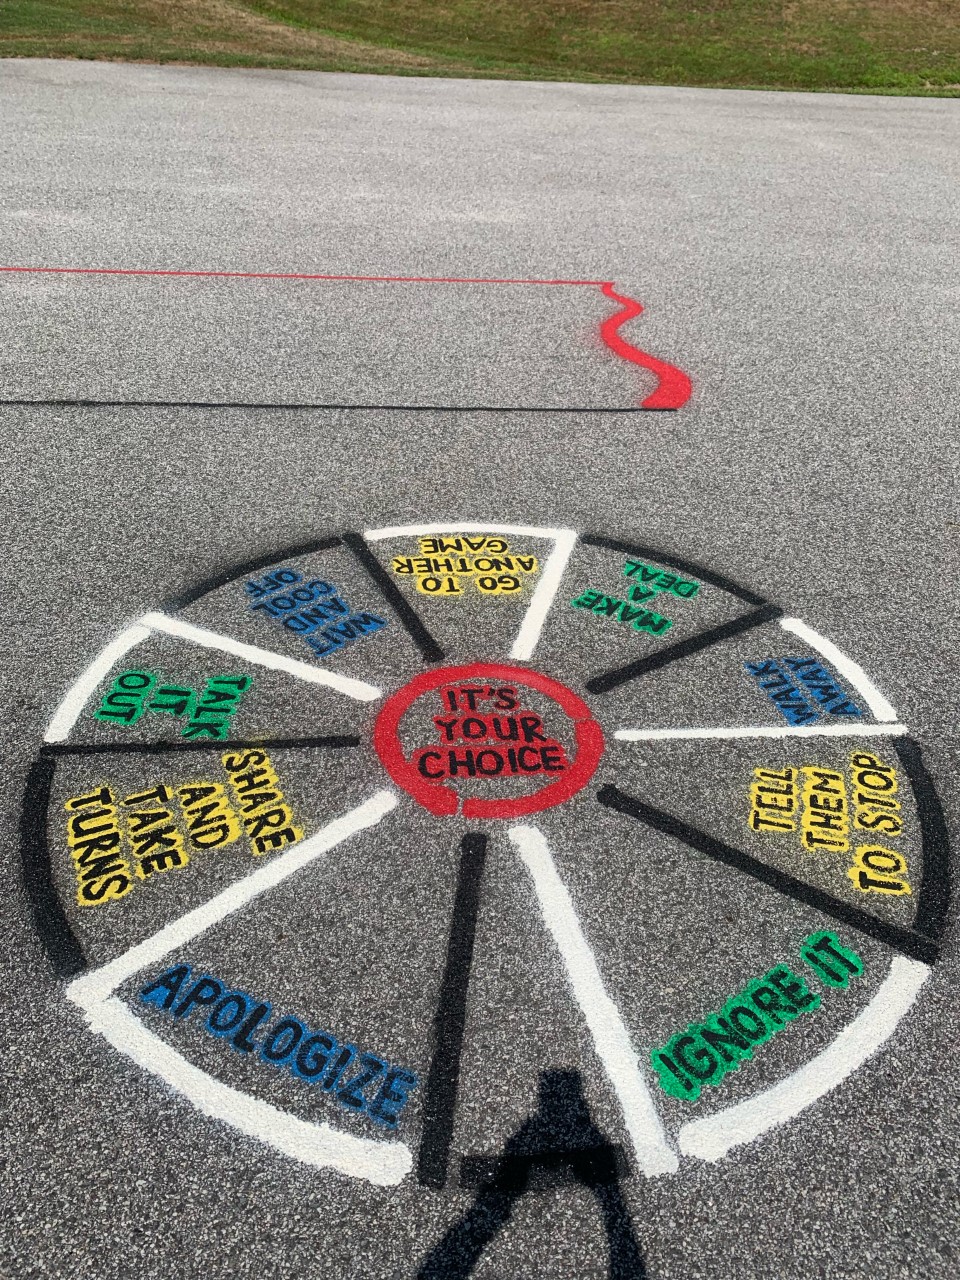 a circle is spray painted onto the blacktop. It lists different stratgies to settle disputes: apologize, walk away, talk it out, ignore it.  